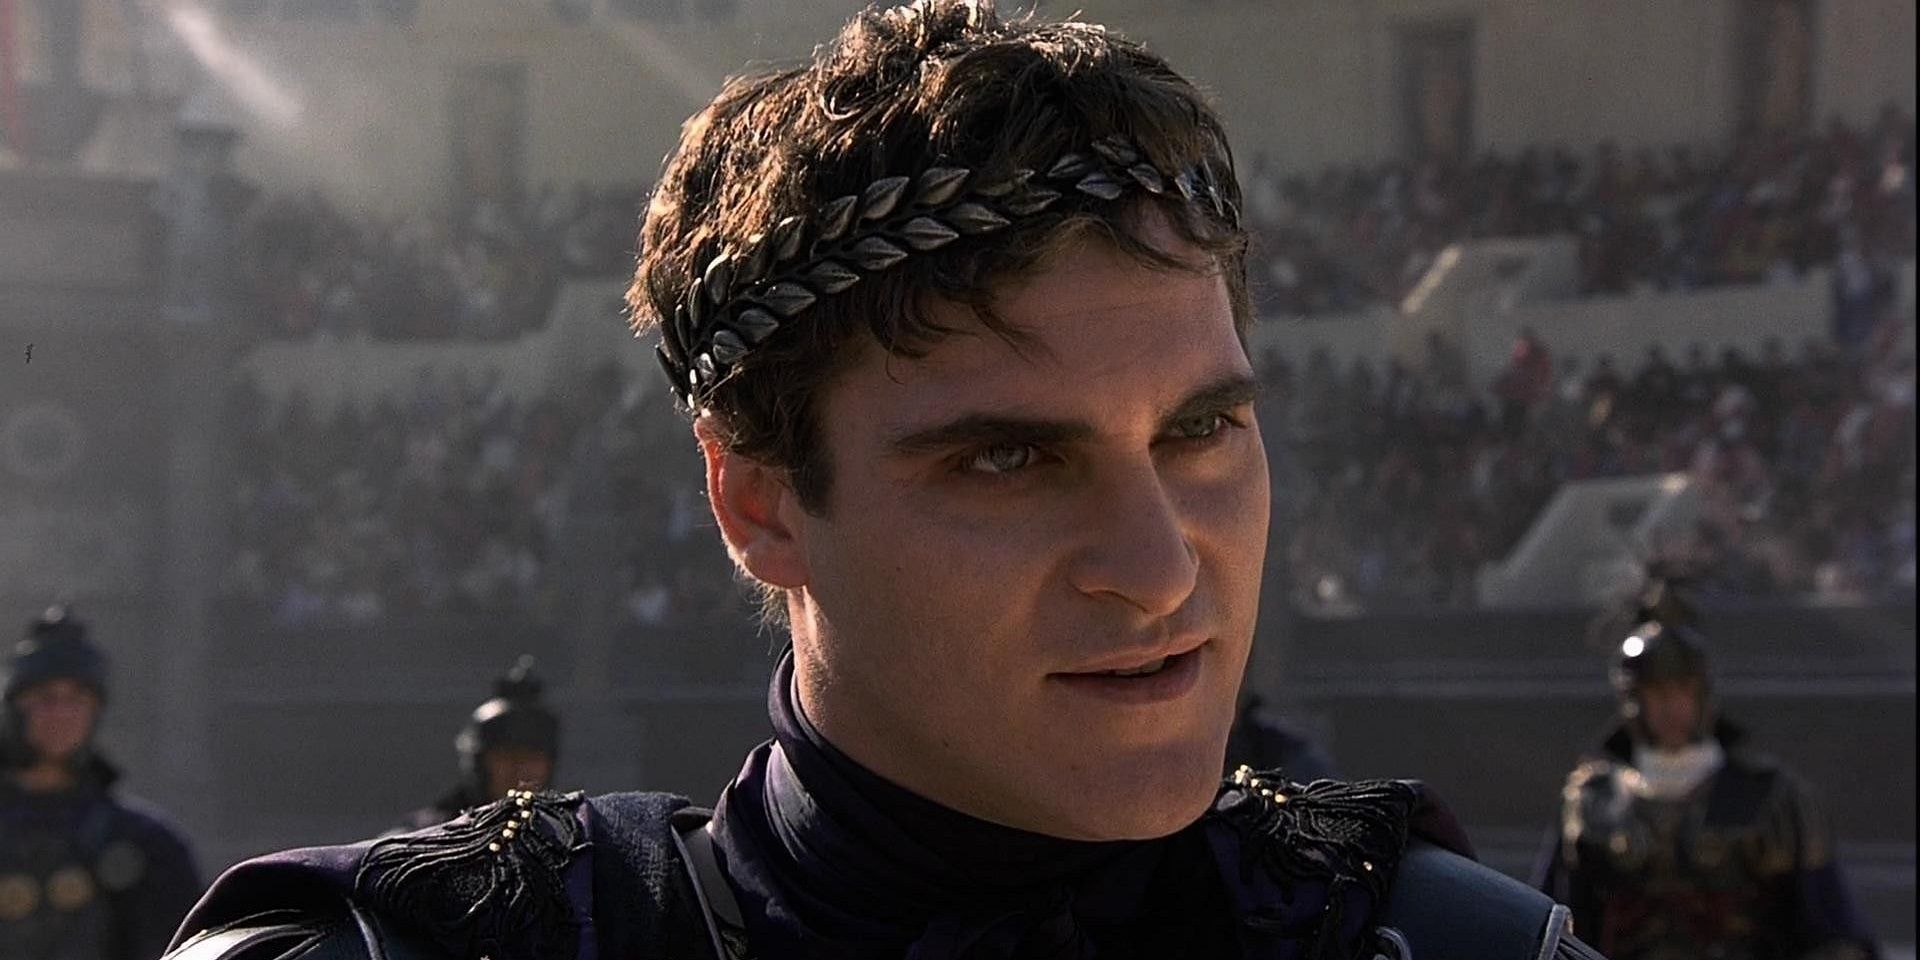 Gladiator 2 Has Already Made The Original’s Dramatic Ending Completely Pointless